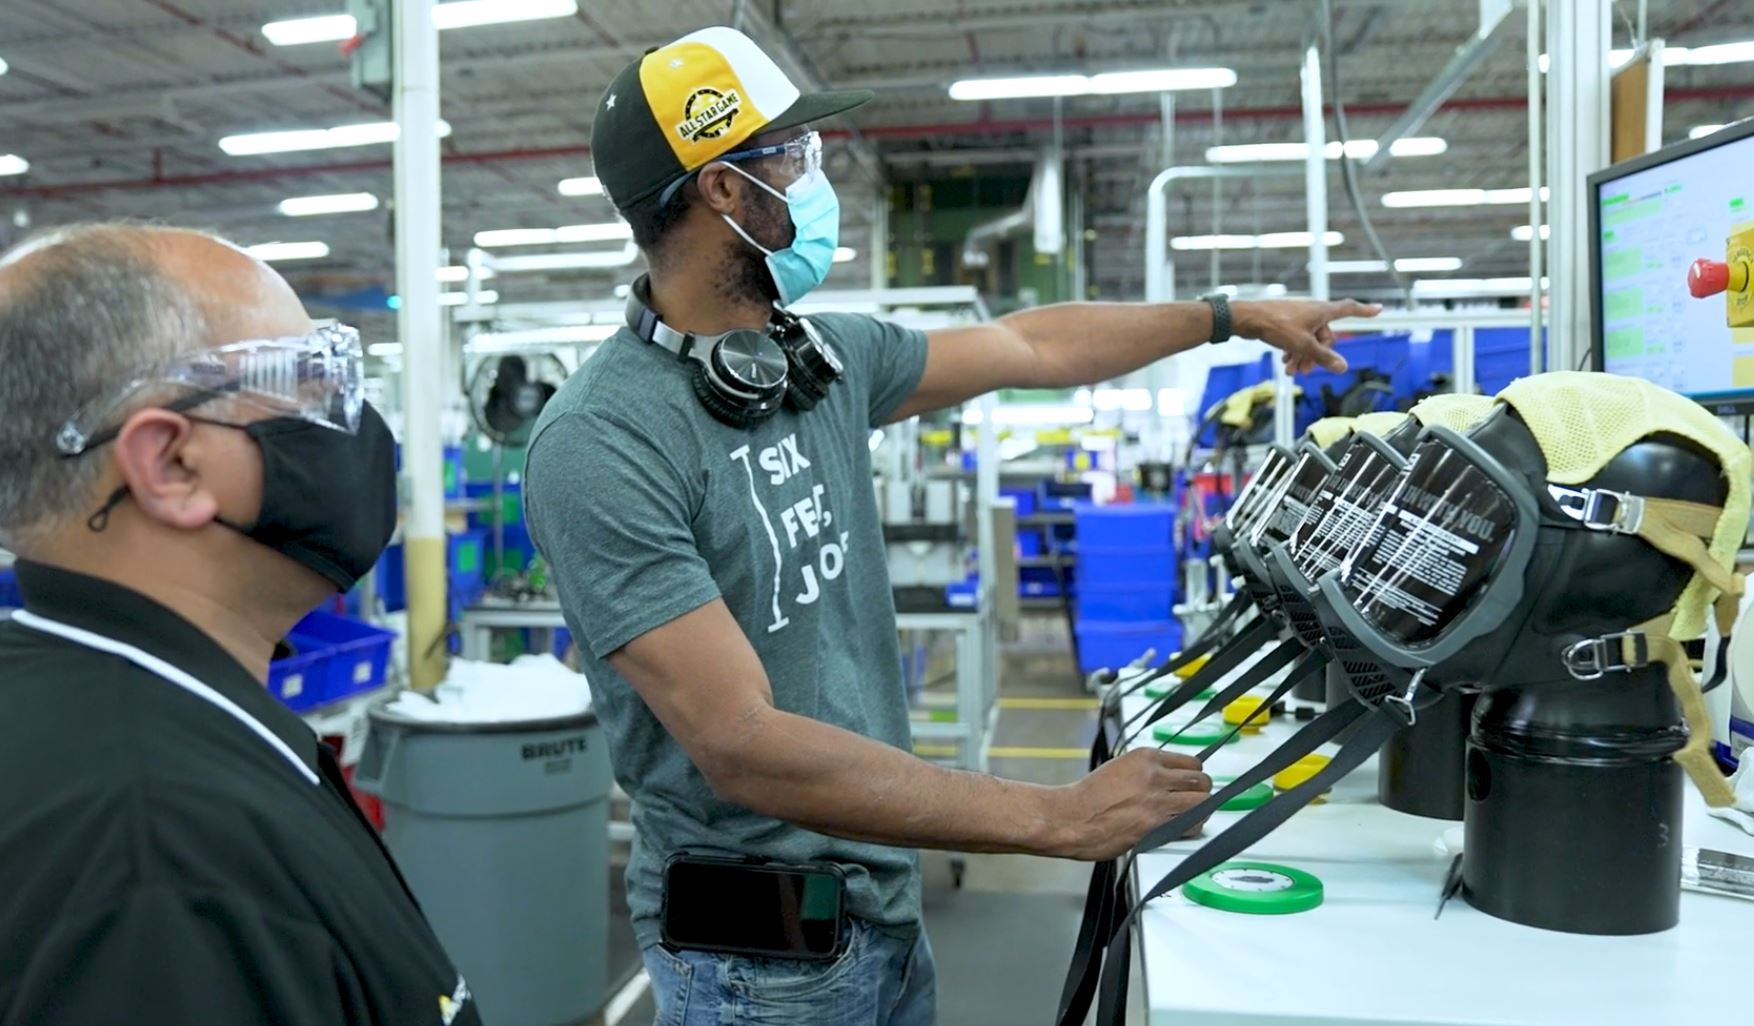 Protecting Workers, Protecting Lives, a Docuseries about PPE by the International Safety Equipment Association & dBase Media, Premieres May 27, 2021